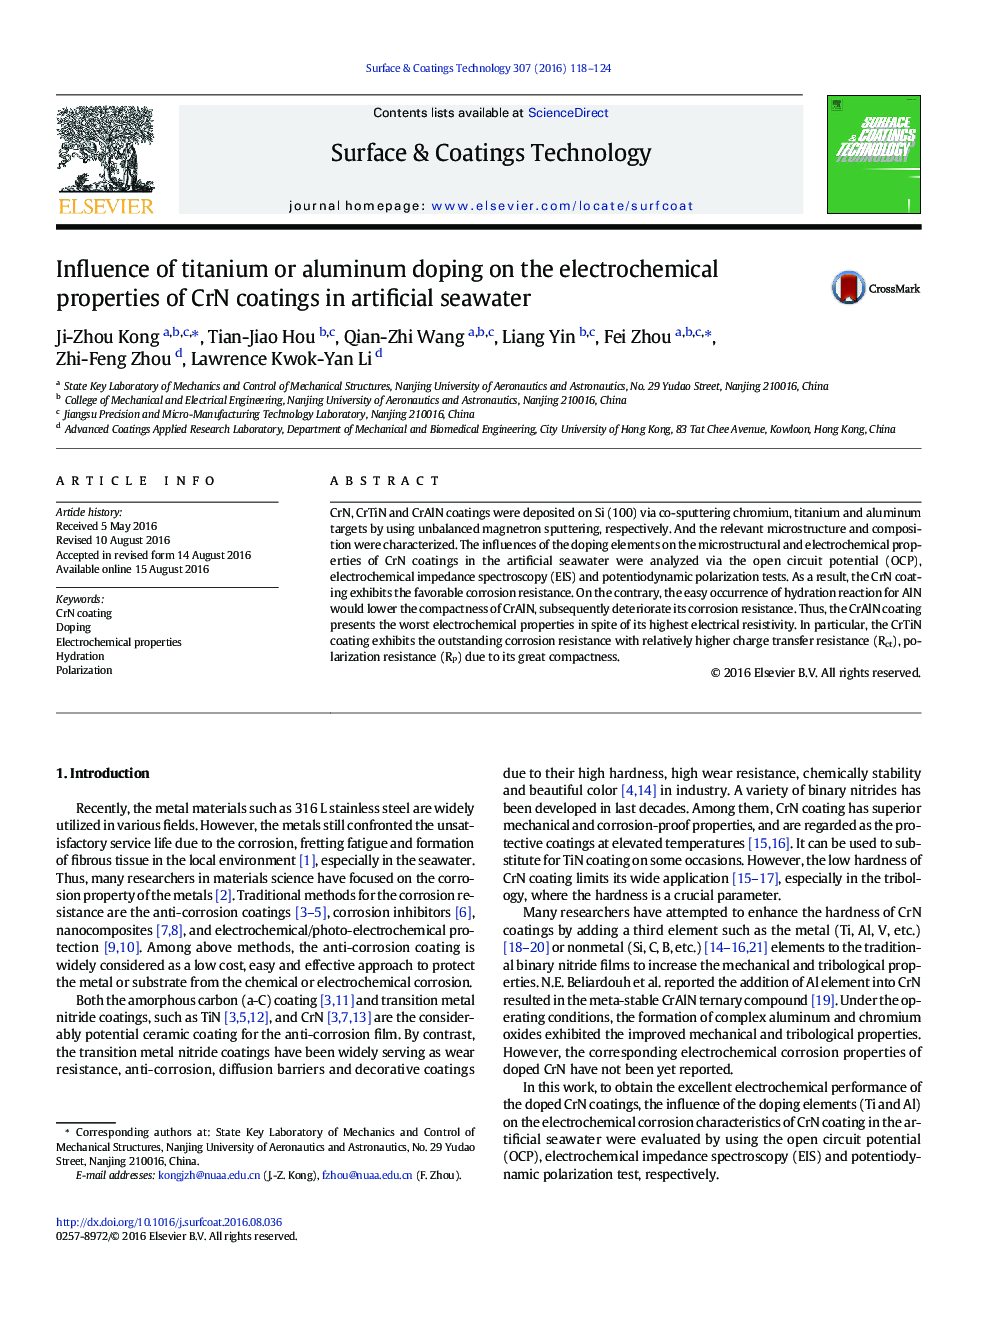 Influence of titanium or aluminum doping on the electrochemical properties of CrN coatings in artificial seawater